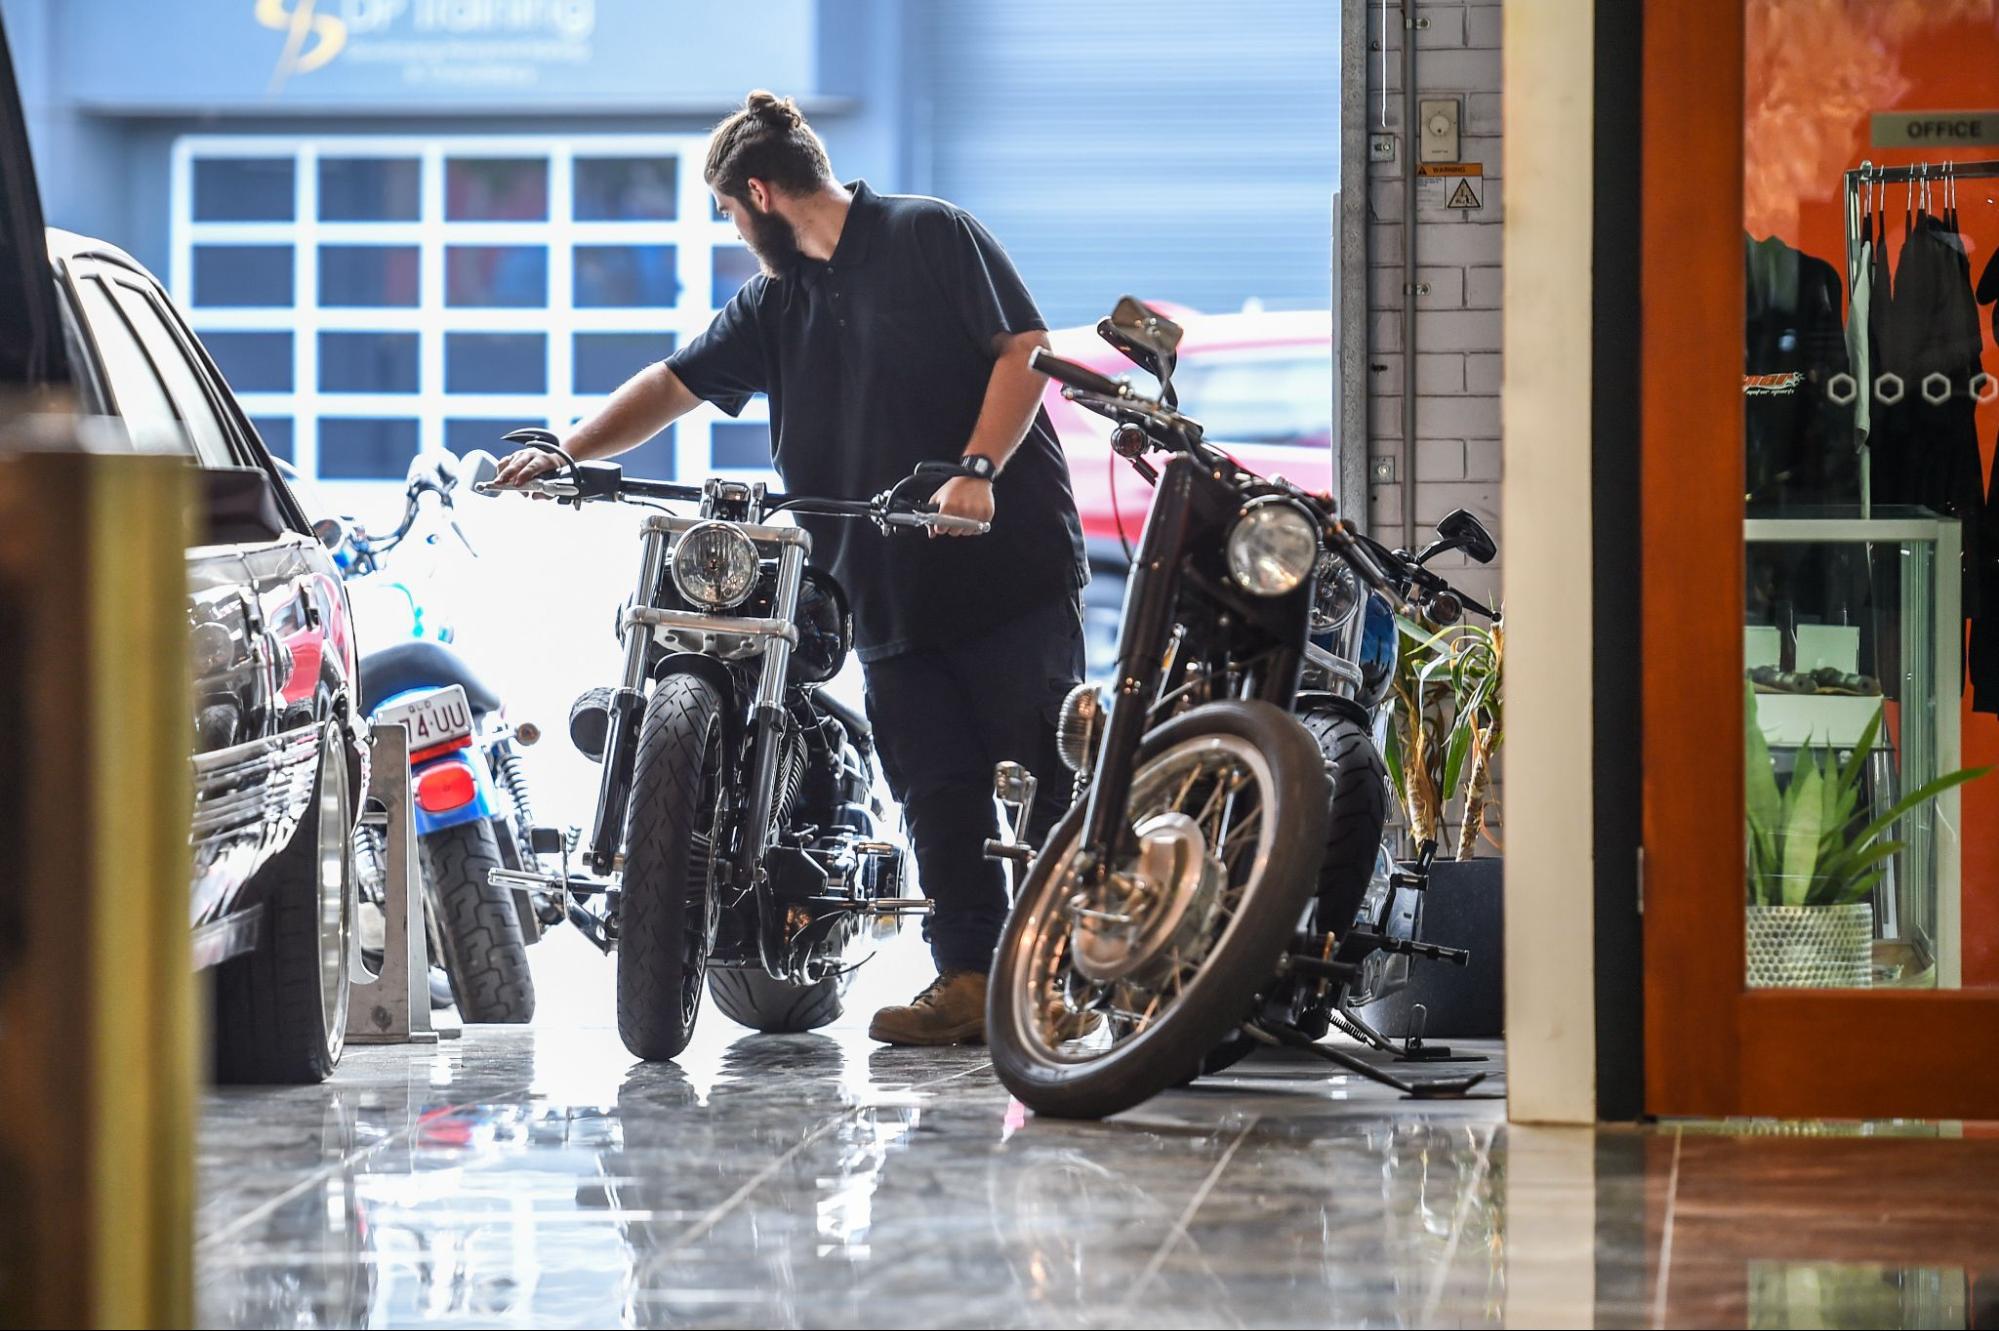 Full motorcycle service